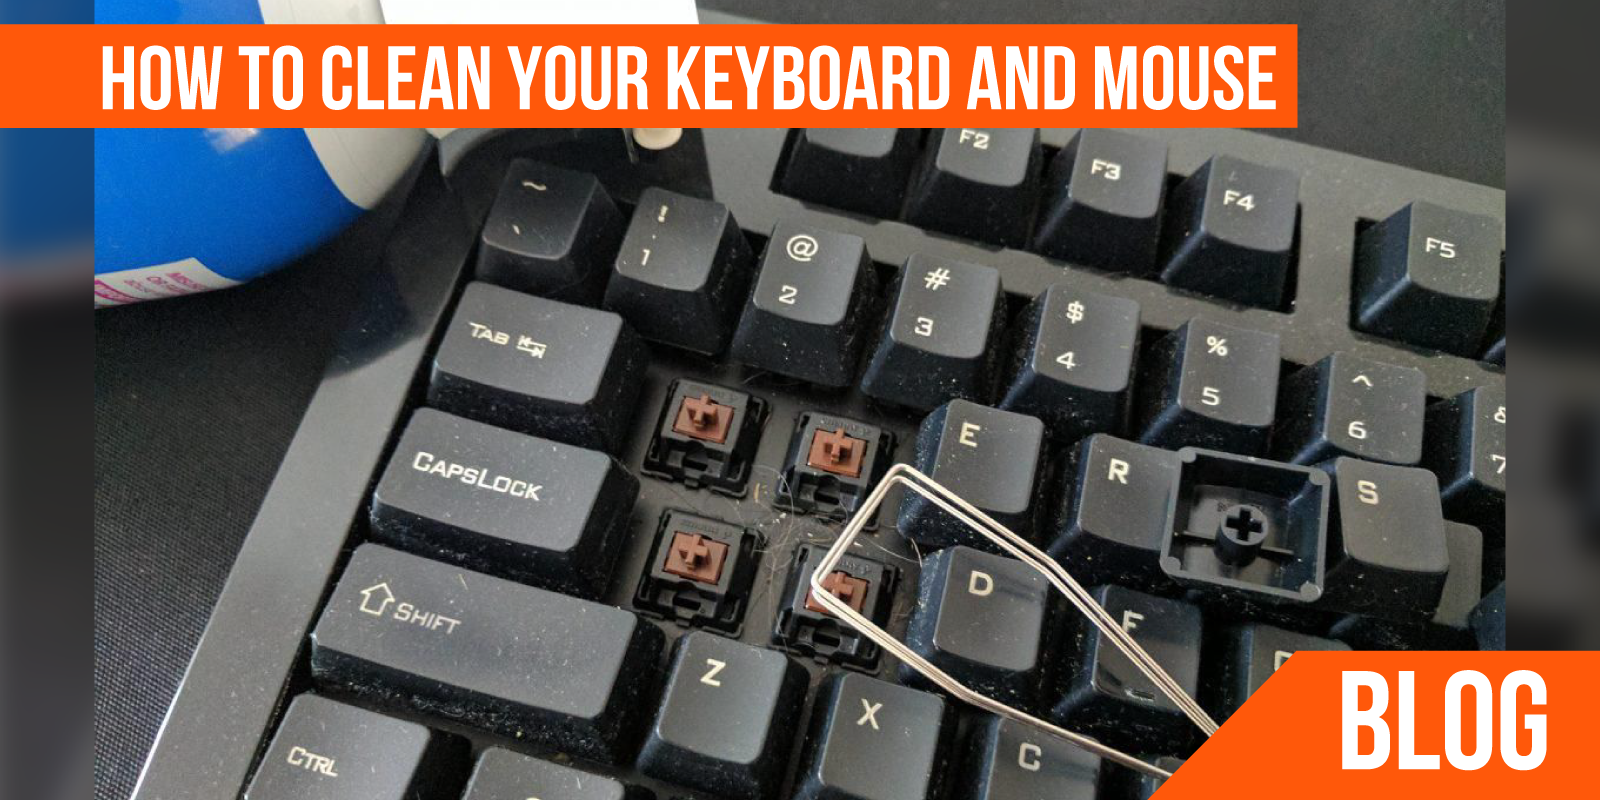 How to Clean a Computer Keyboard and Mouse